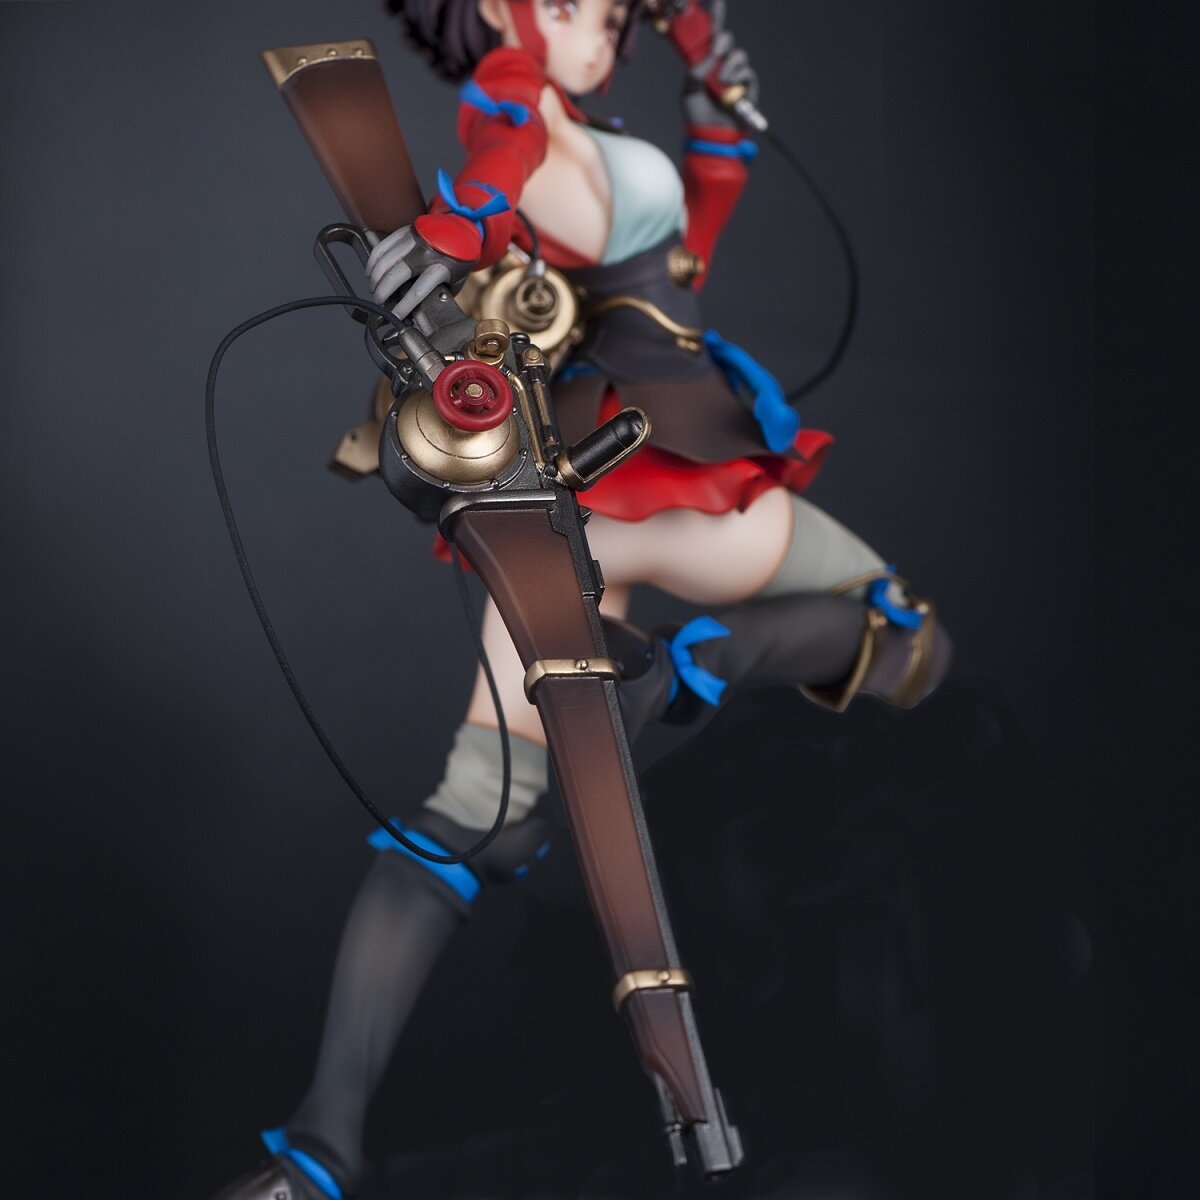 Kabaneri of the Iron Fortress, Mumei, by pachi